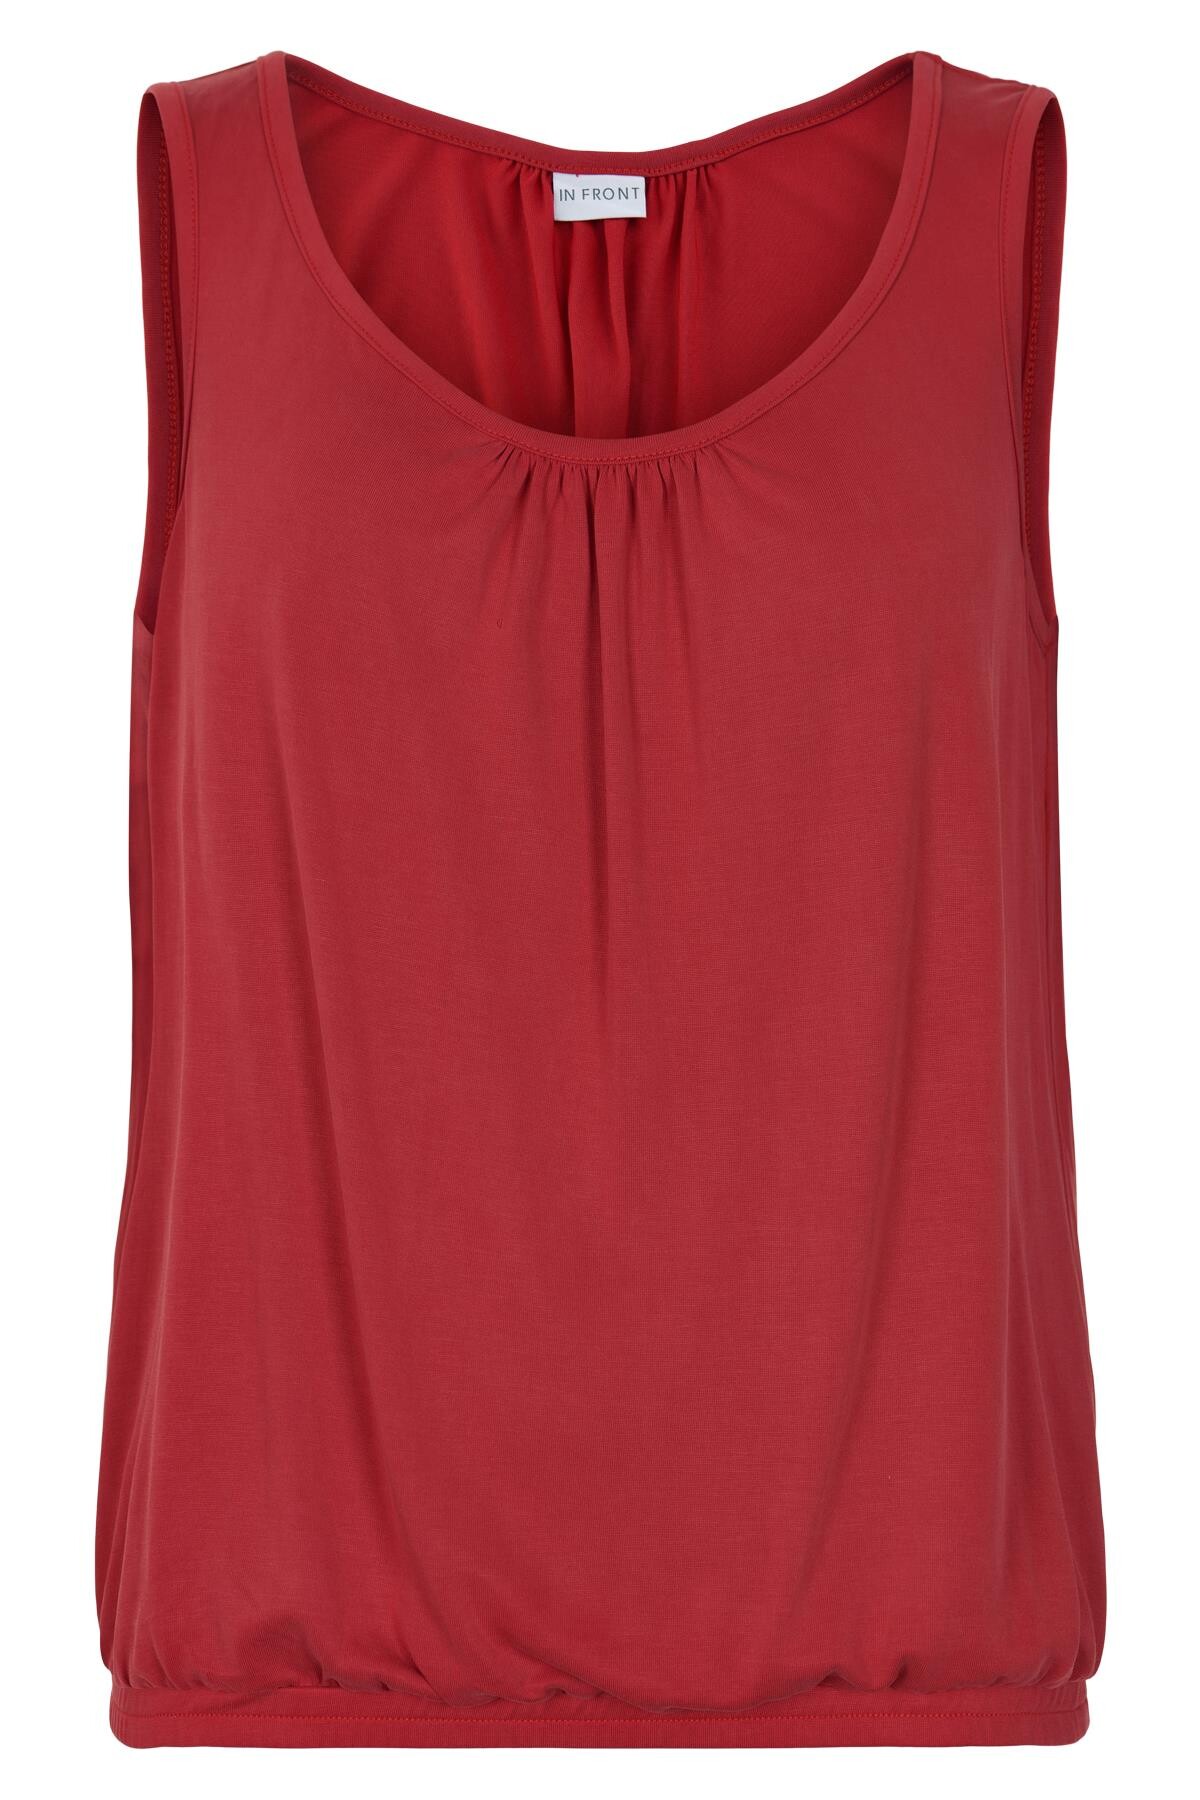 IN FRONT NINA TOP 14982 409 (Red 409)